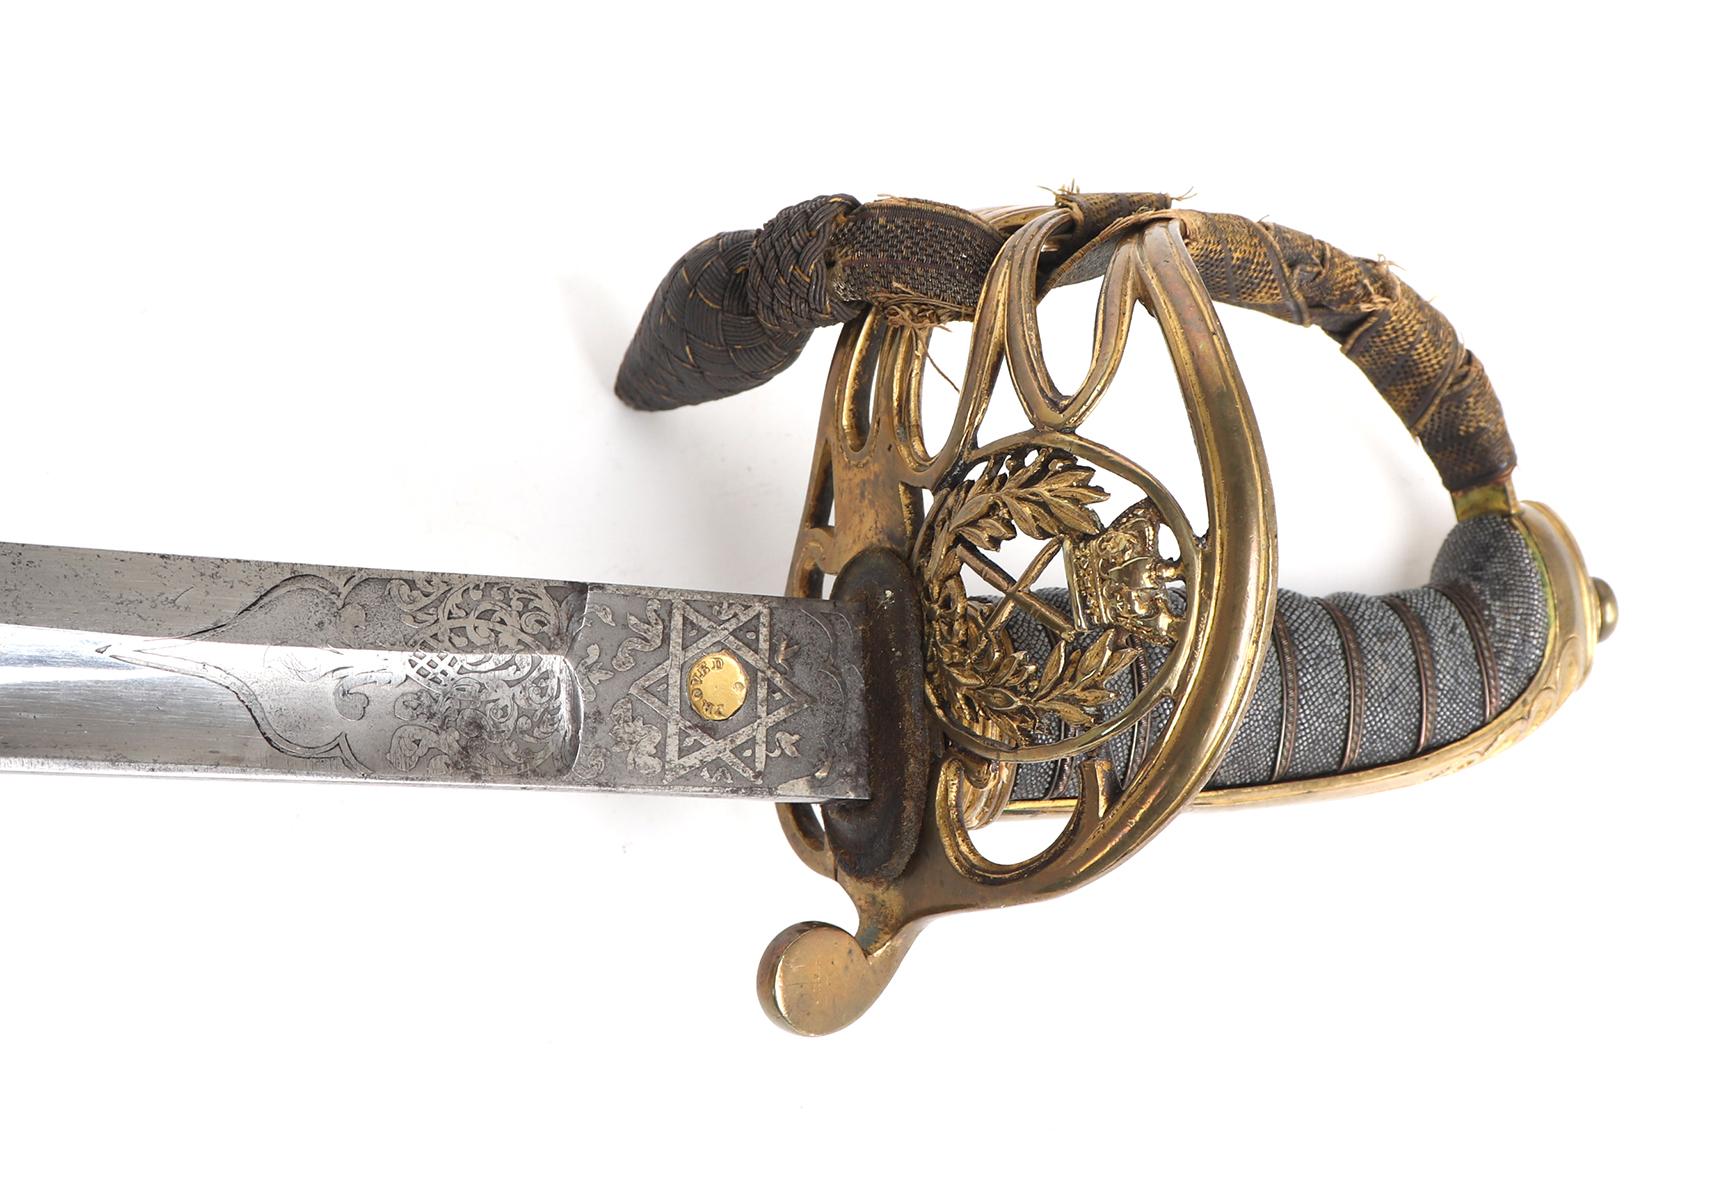 British  Signed General Officer's Sword w/ Scabbard, 1860-1901